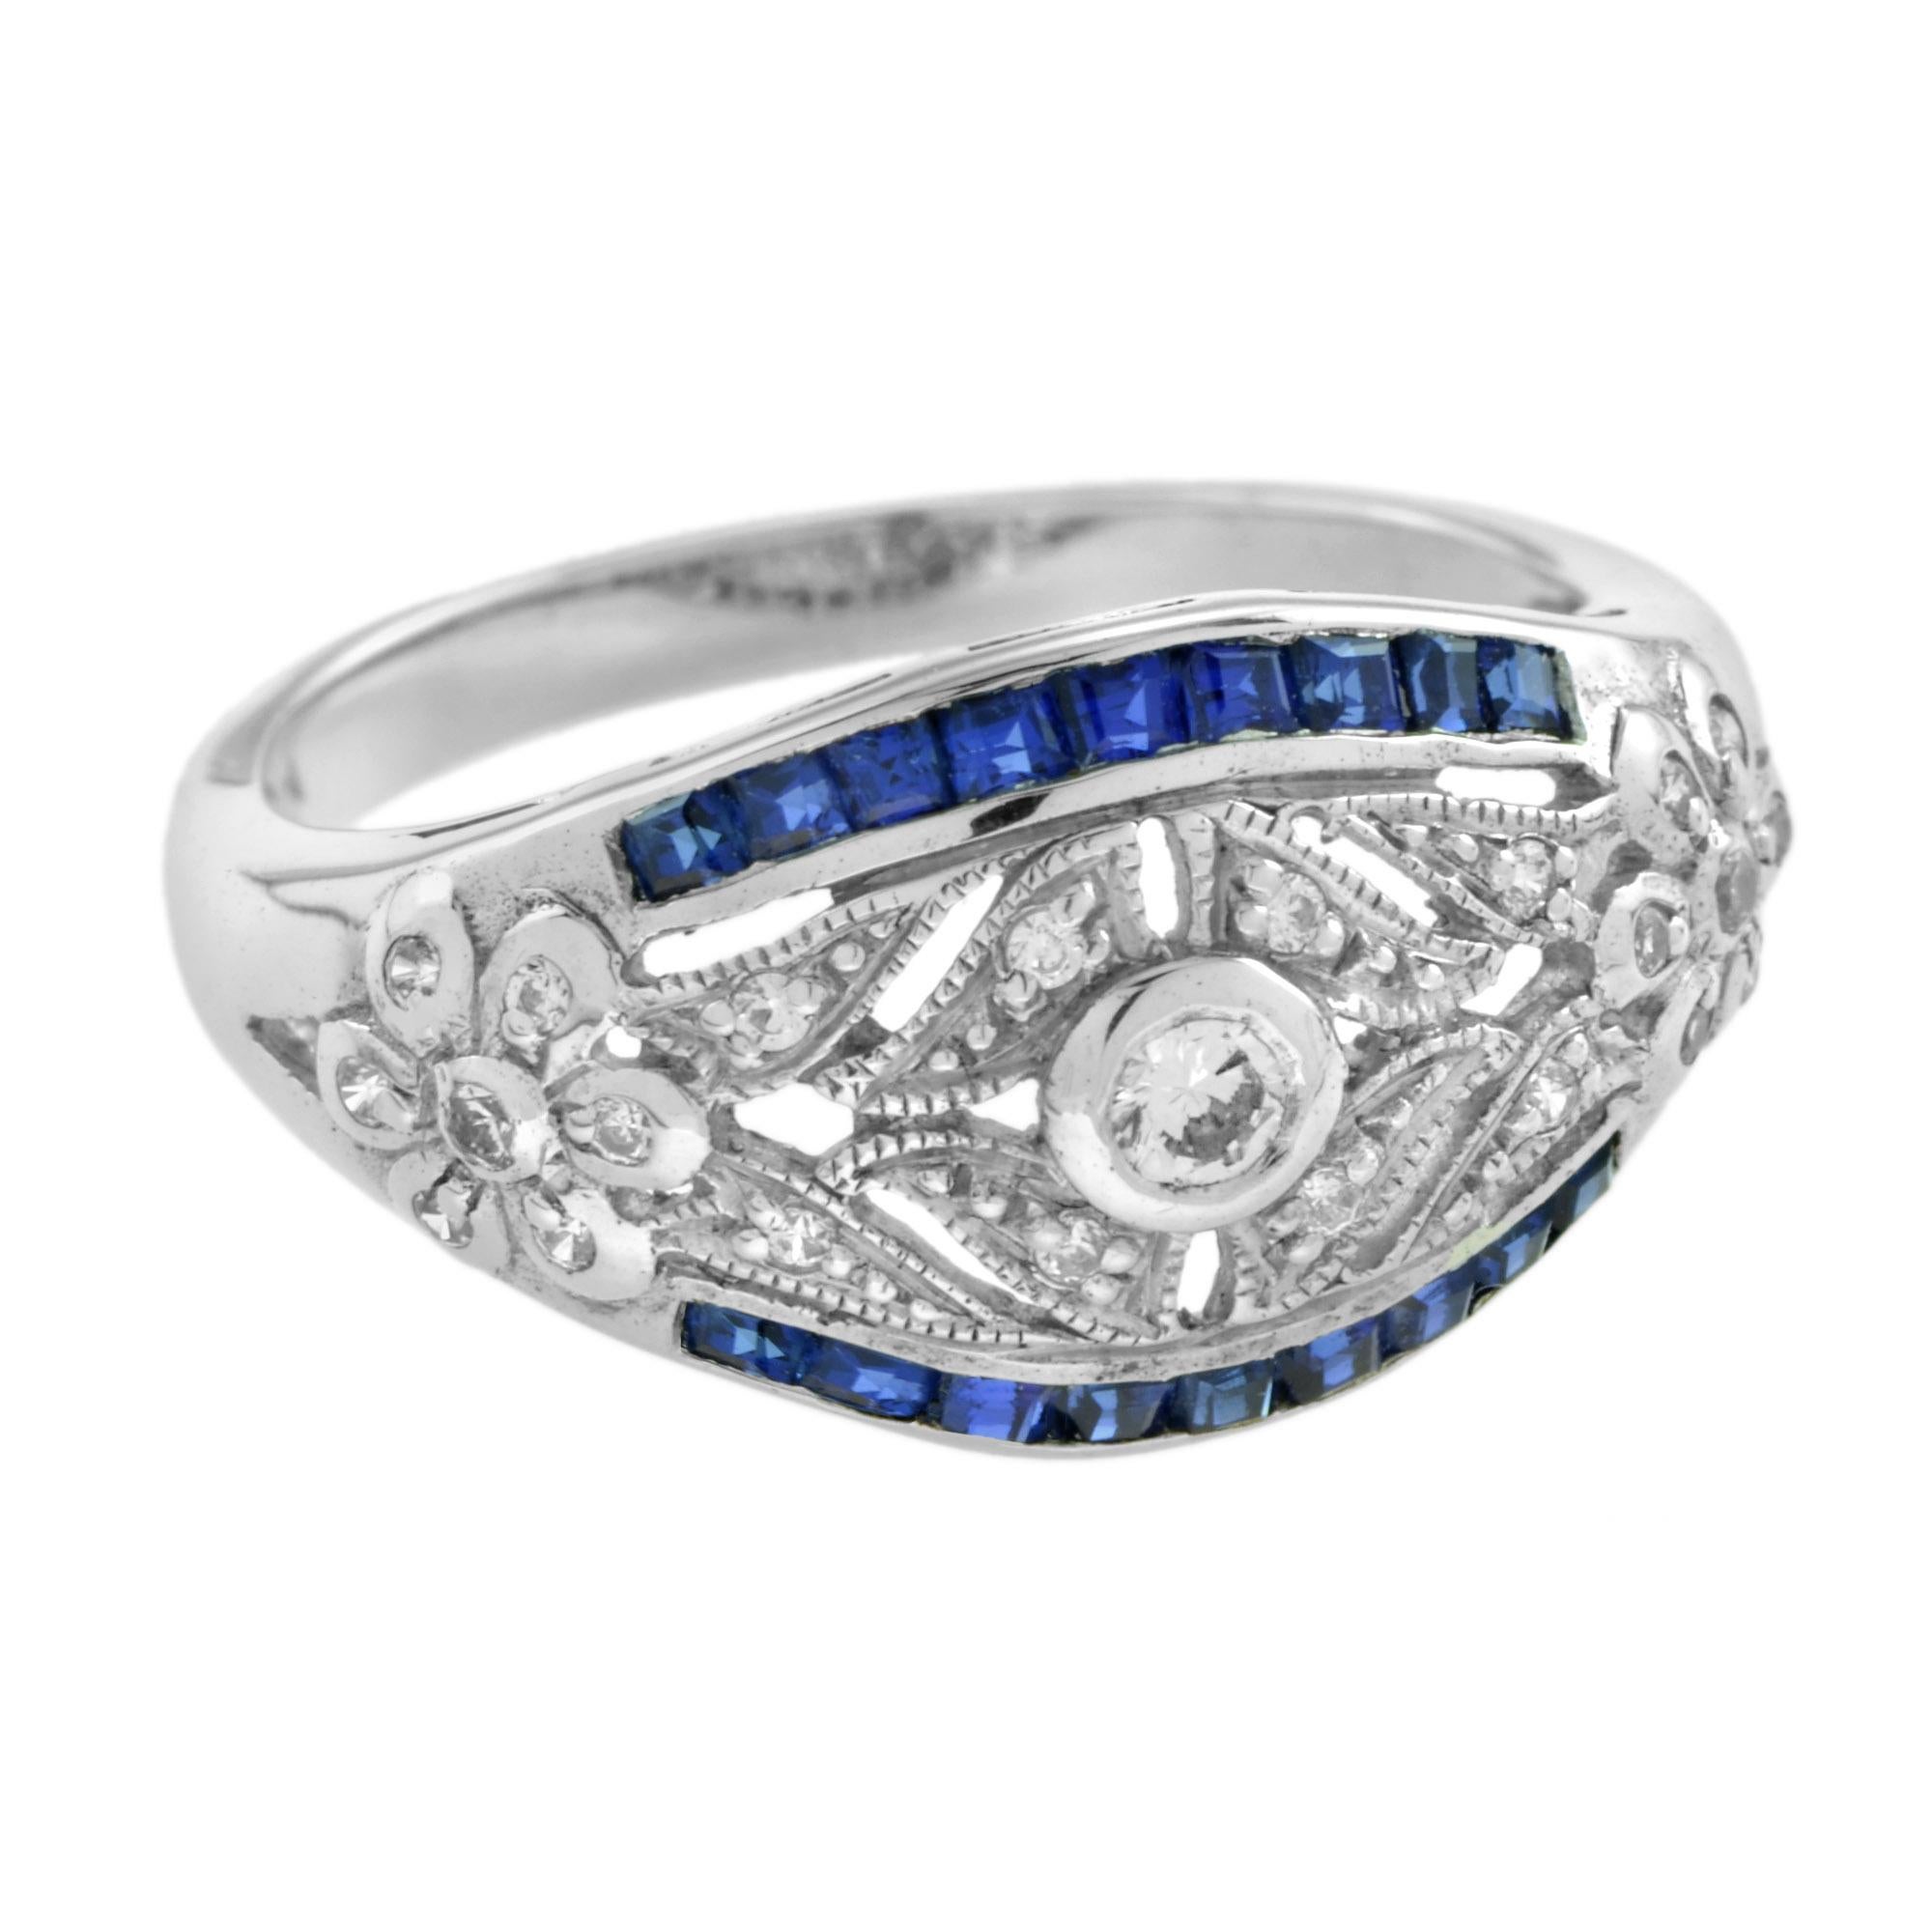 For Sale:  Art Deco Style Diamond and Sapphire Ring in 14K White Gold 2